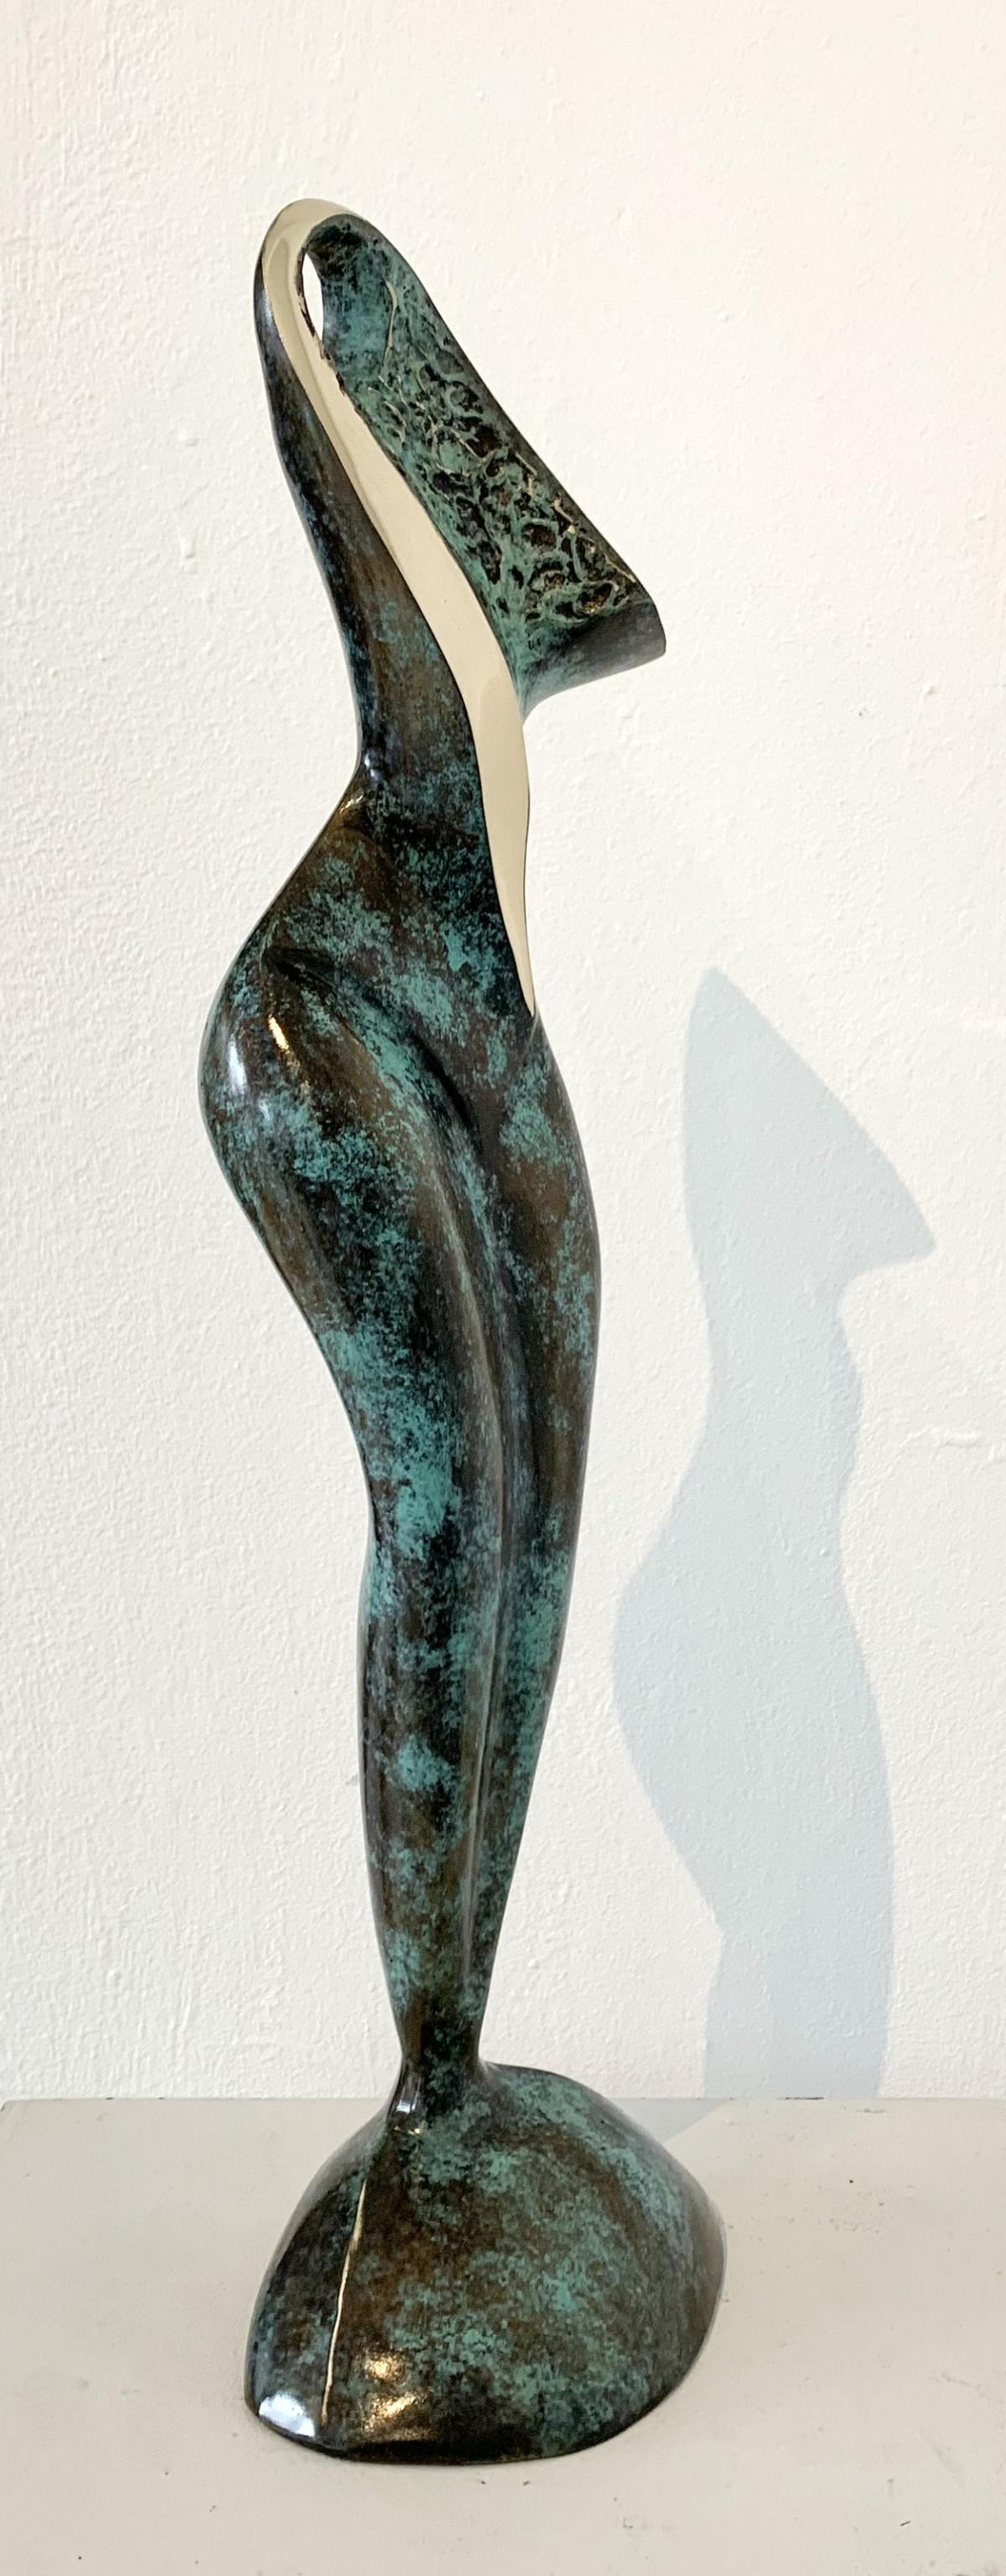 Muse - XXI century Contemporary bronze sculpture, Abstract & figurative - Sculpture by Stanisław Wysocki